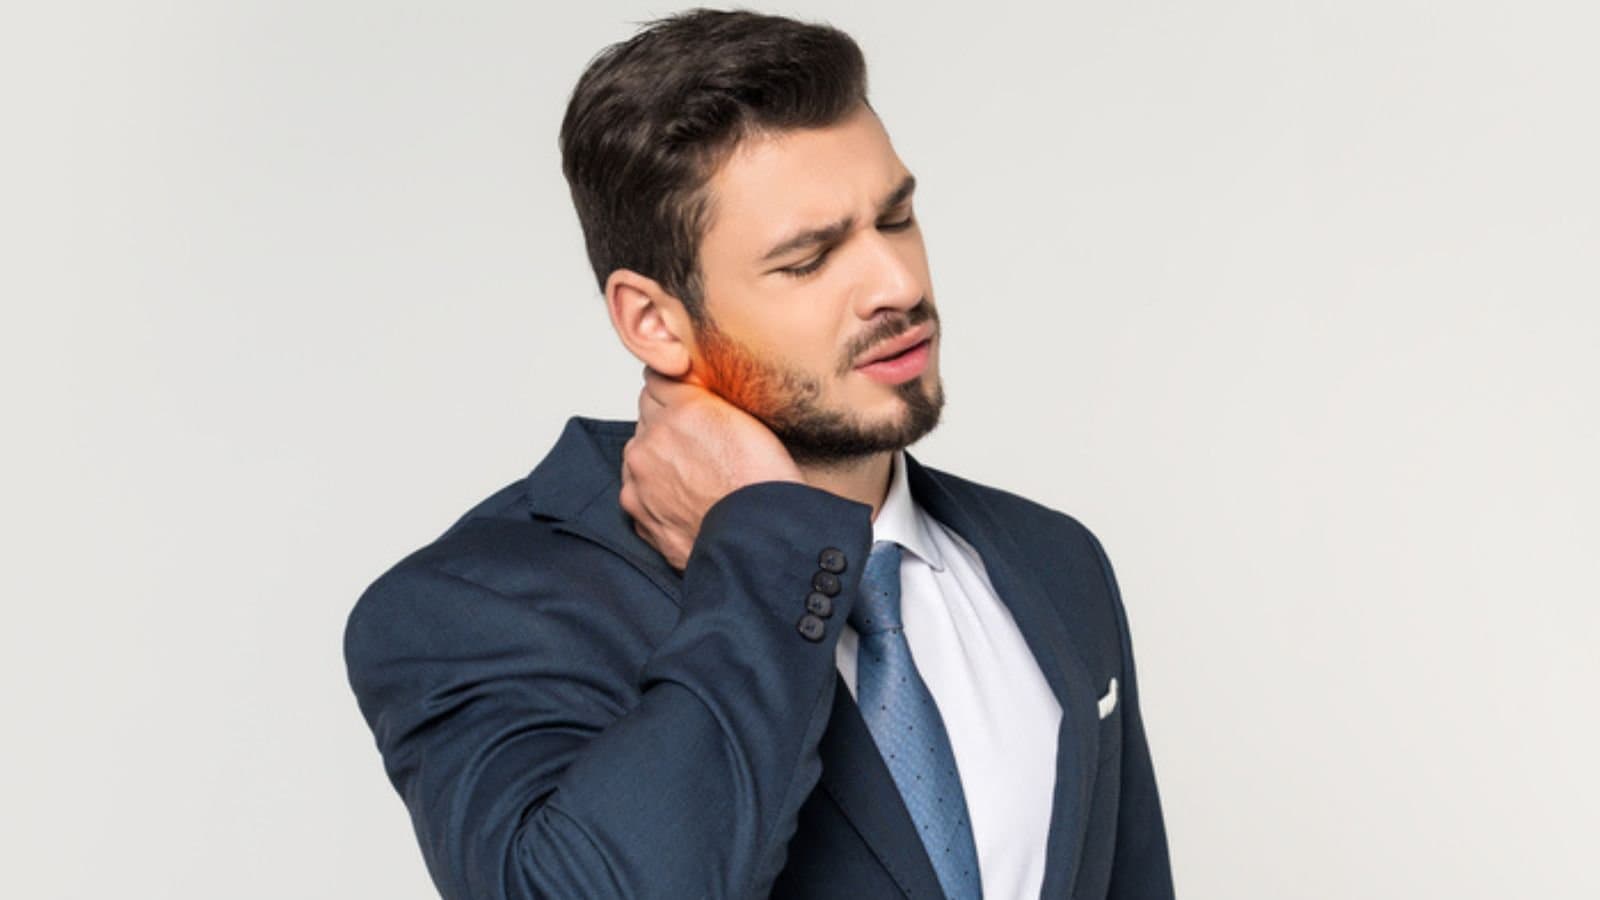 Young businessman with closed eyes suffering from pain